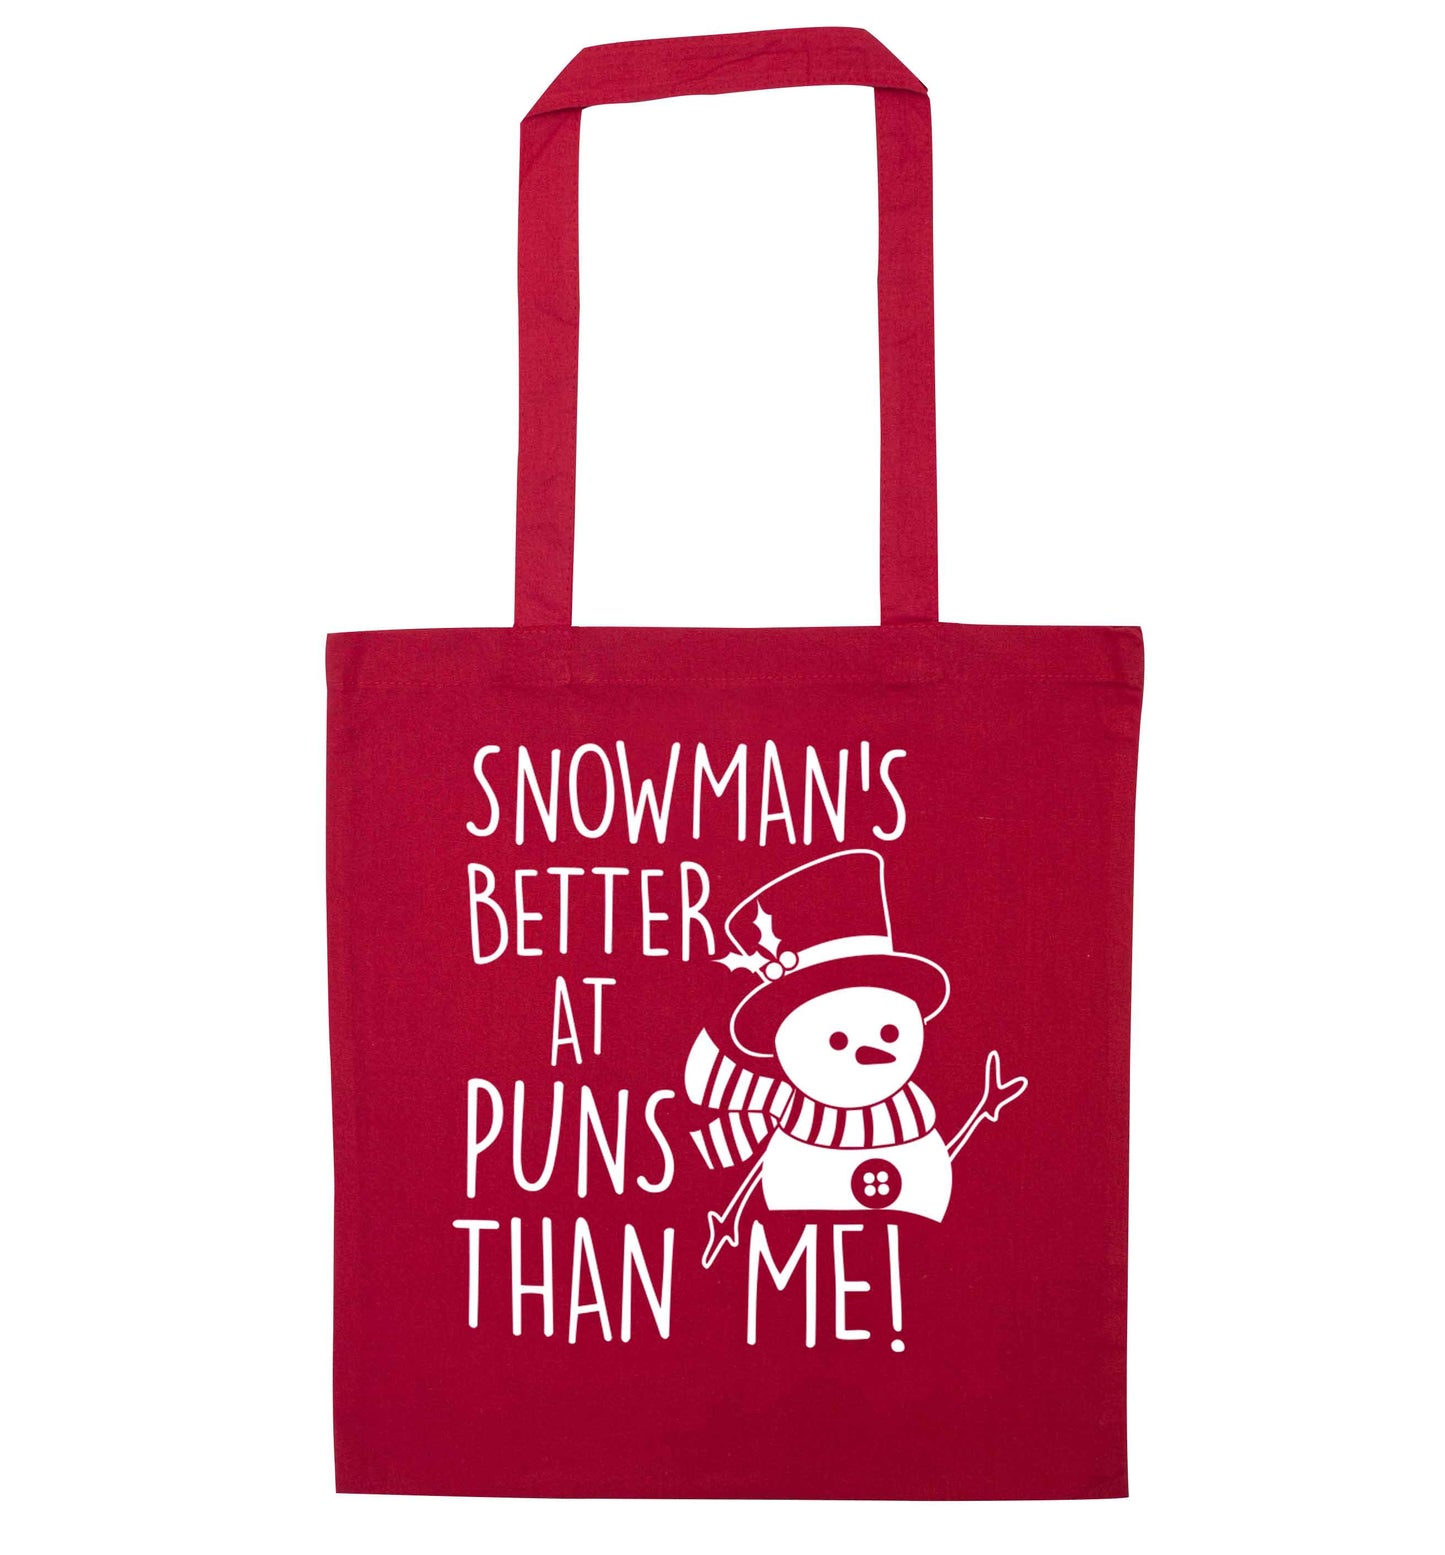 Snowman's Puns Me red tote bag